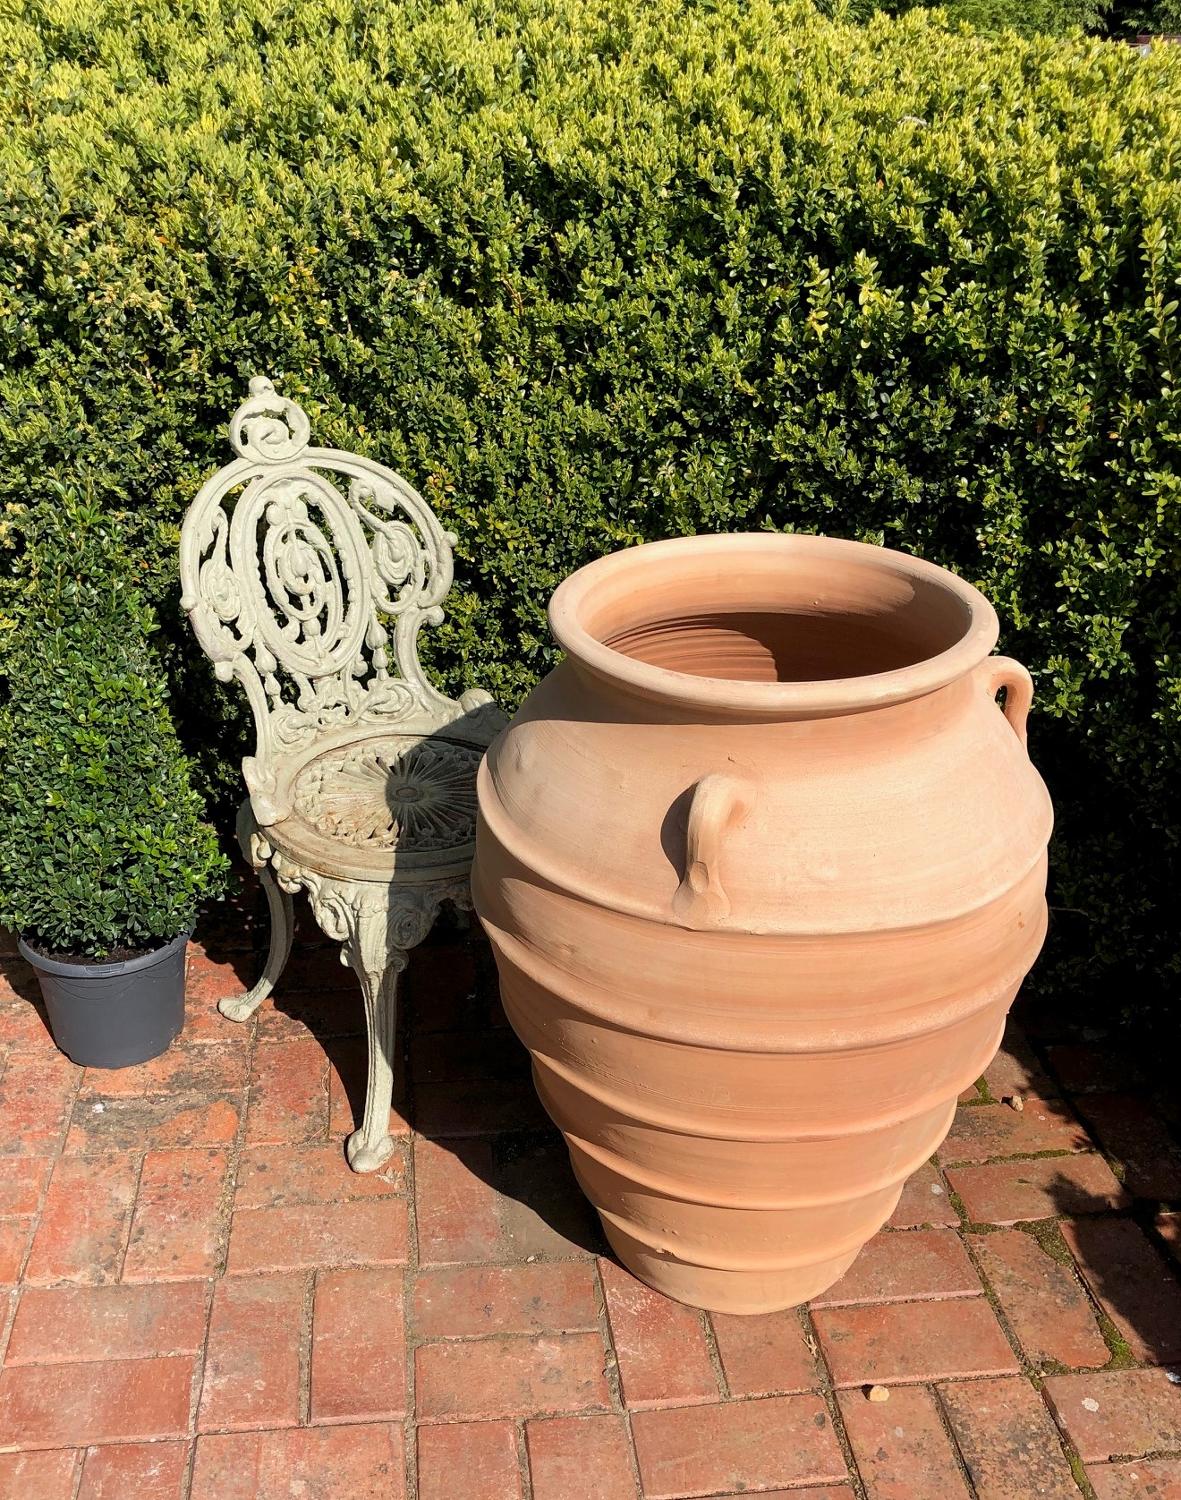 Large Mediterranean style clay pots